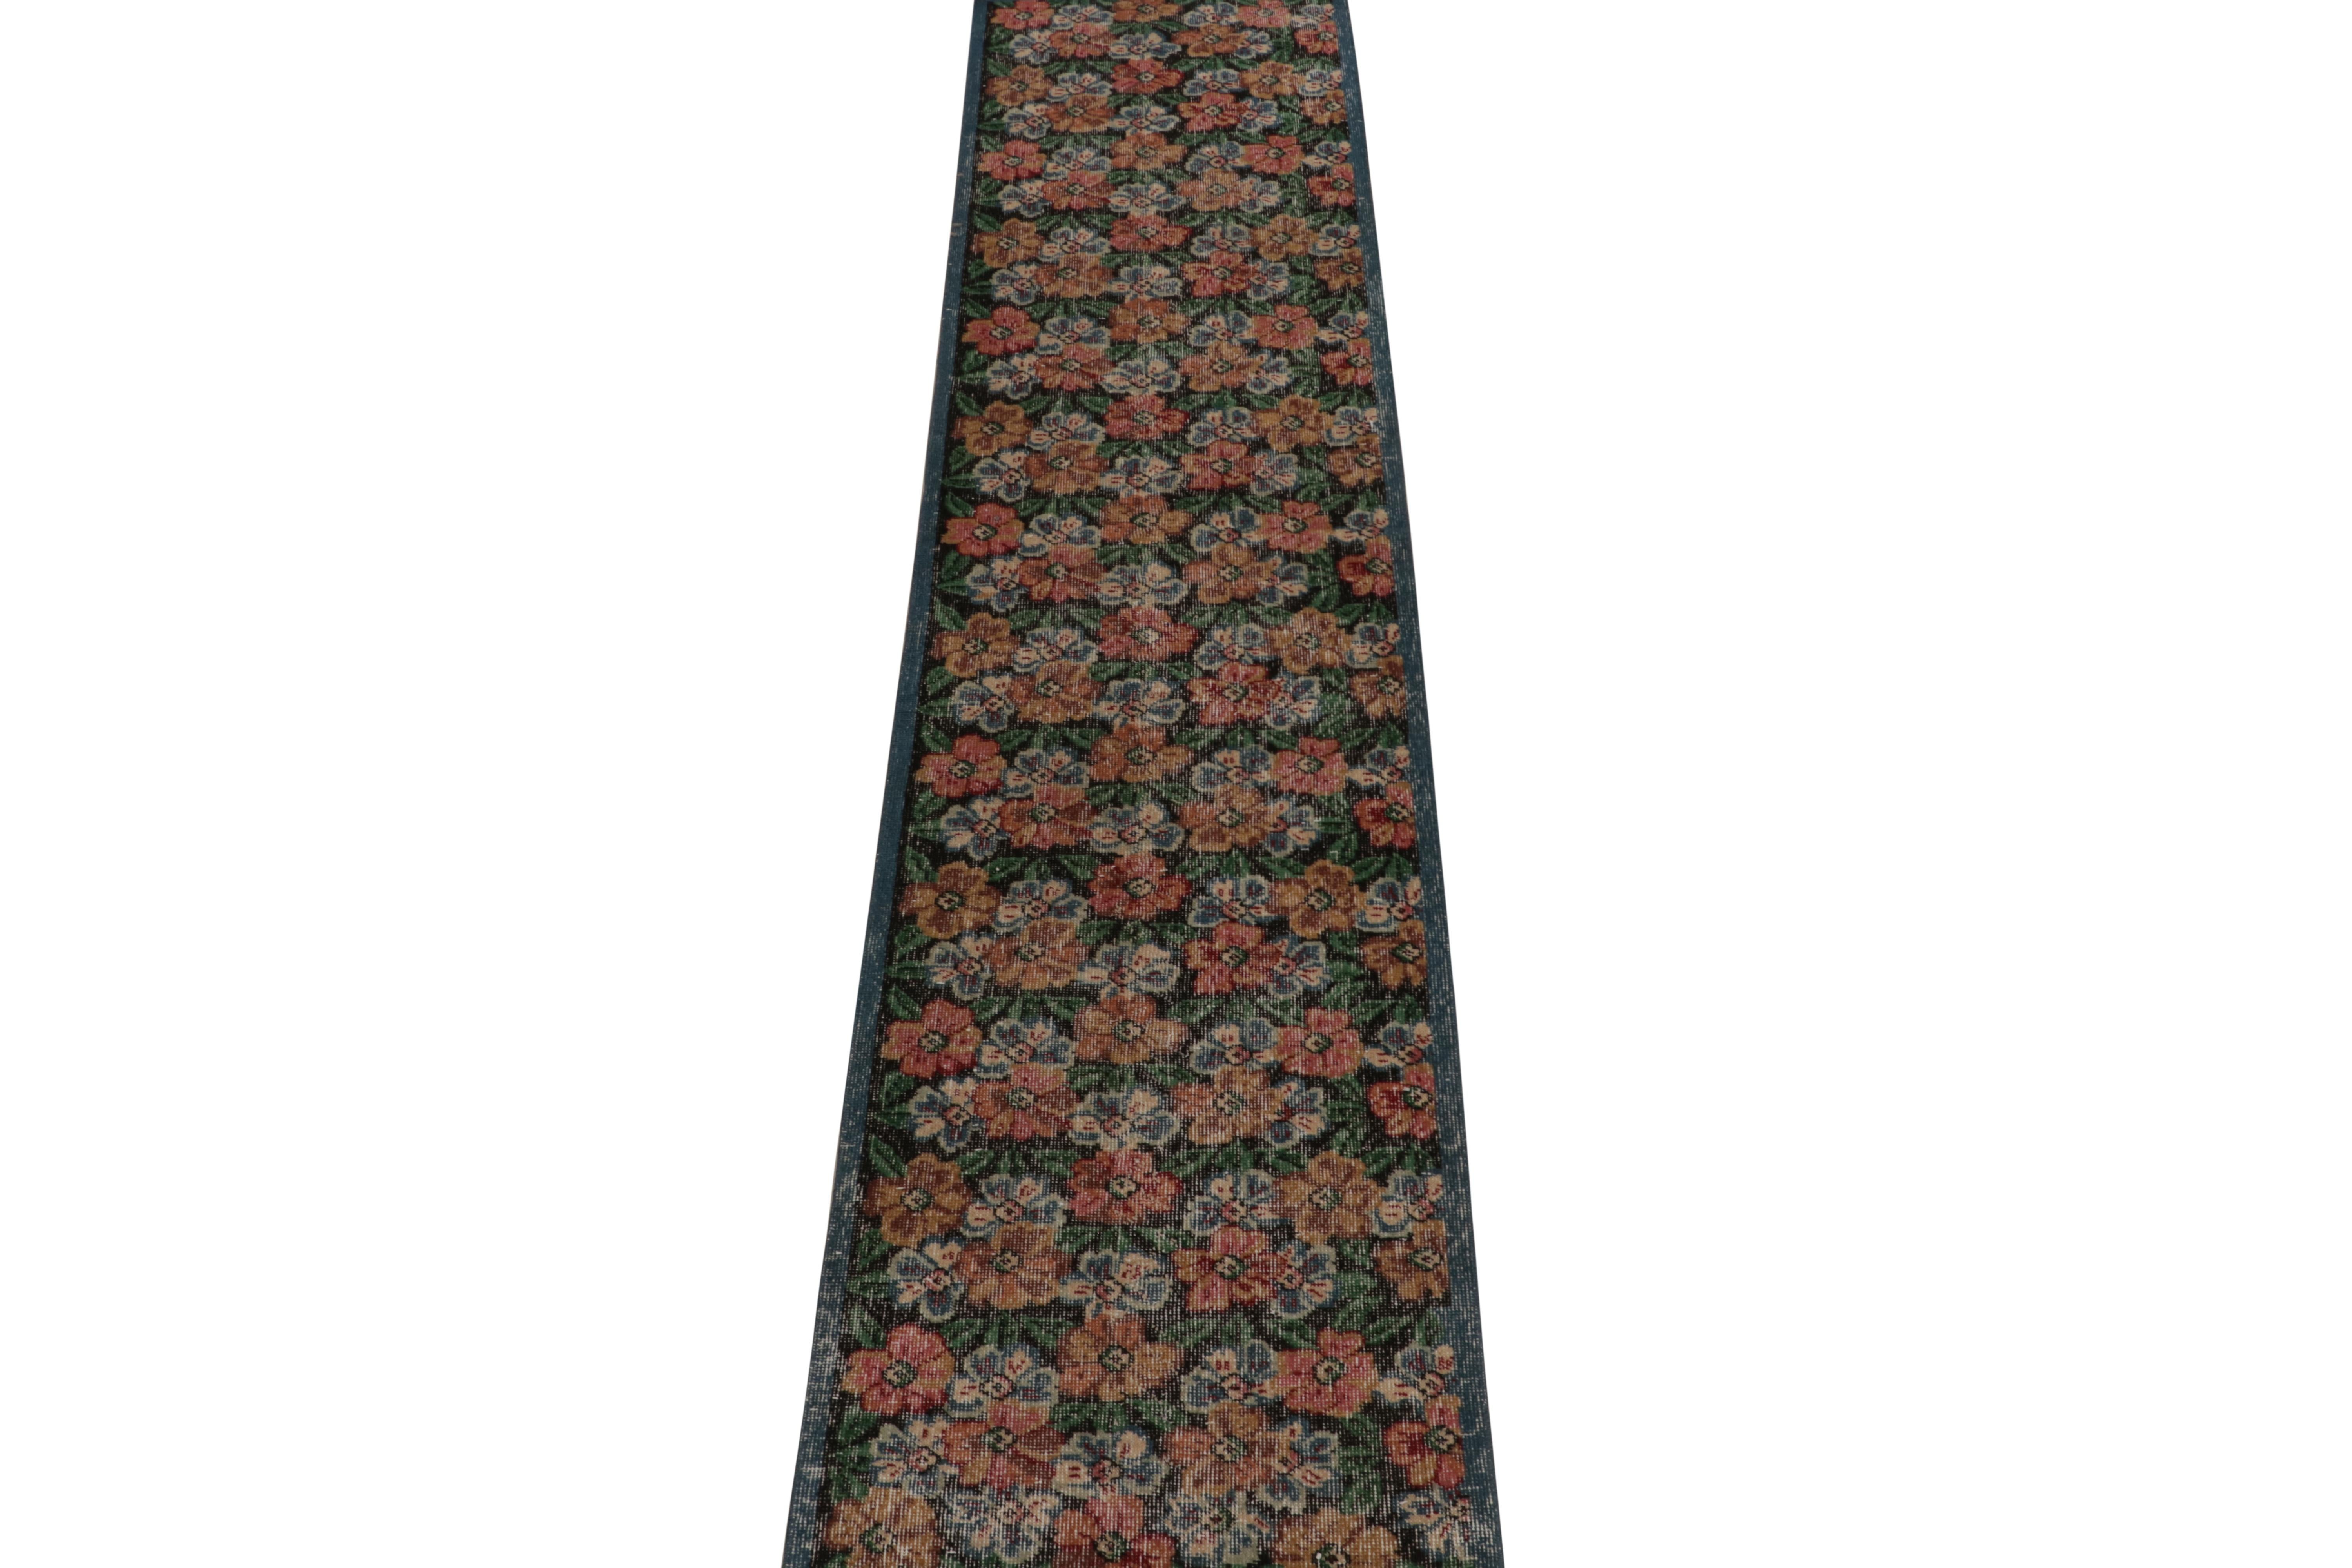 This vintage 2x10 runner is a new addition to Rug & Kilim’s commemorative Mid-Century Pasha Collection. This line is a commemoration of rare curations we believe to hail from mid-century Turkish designer Zeki Müren.
Further on the Design:
This